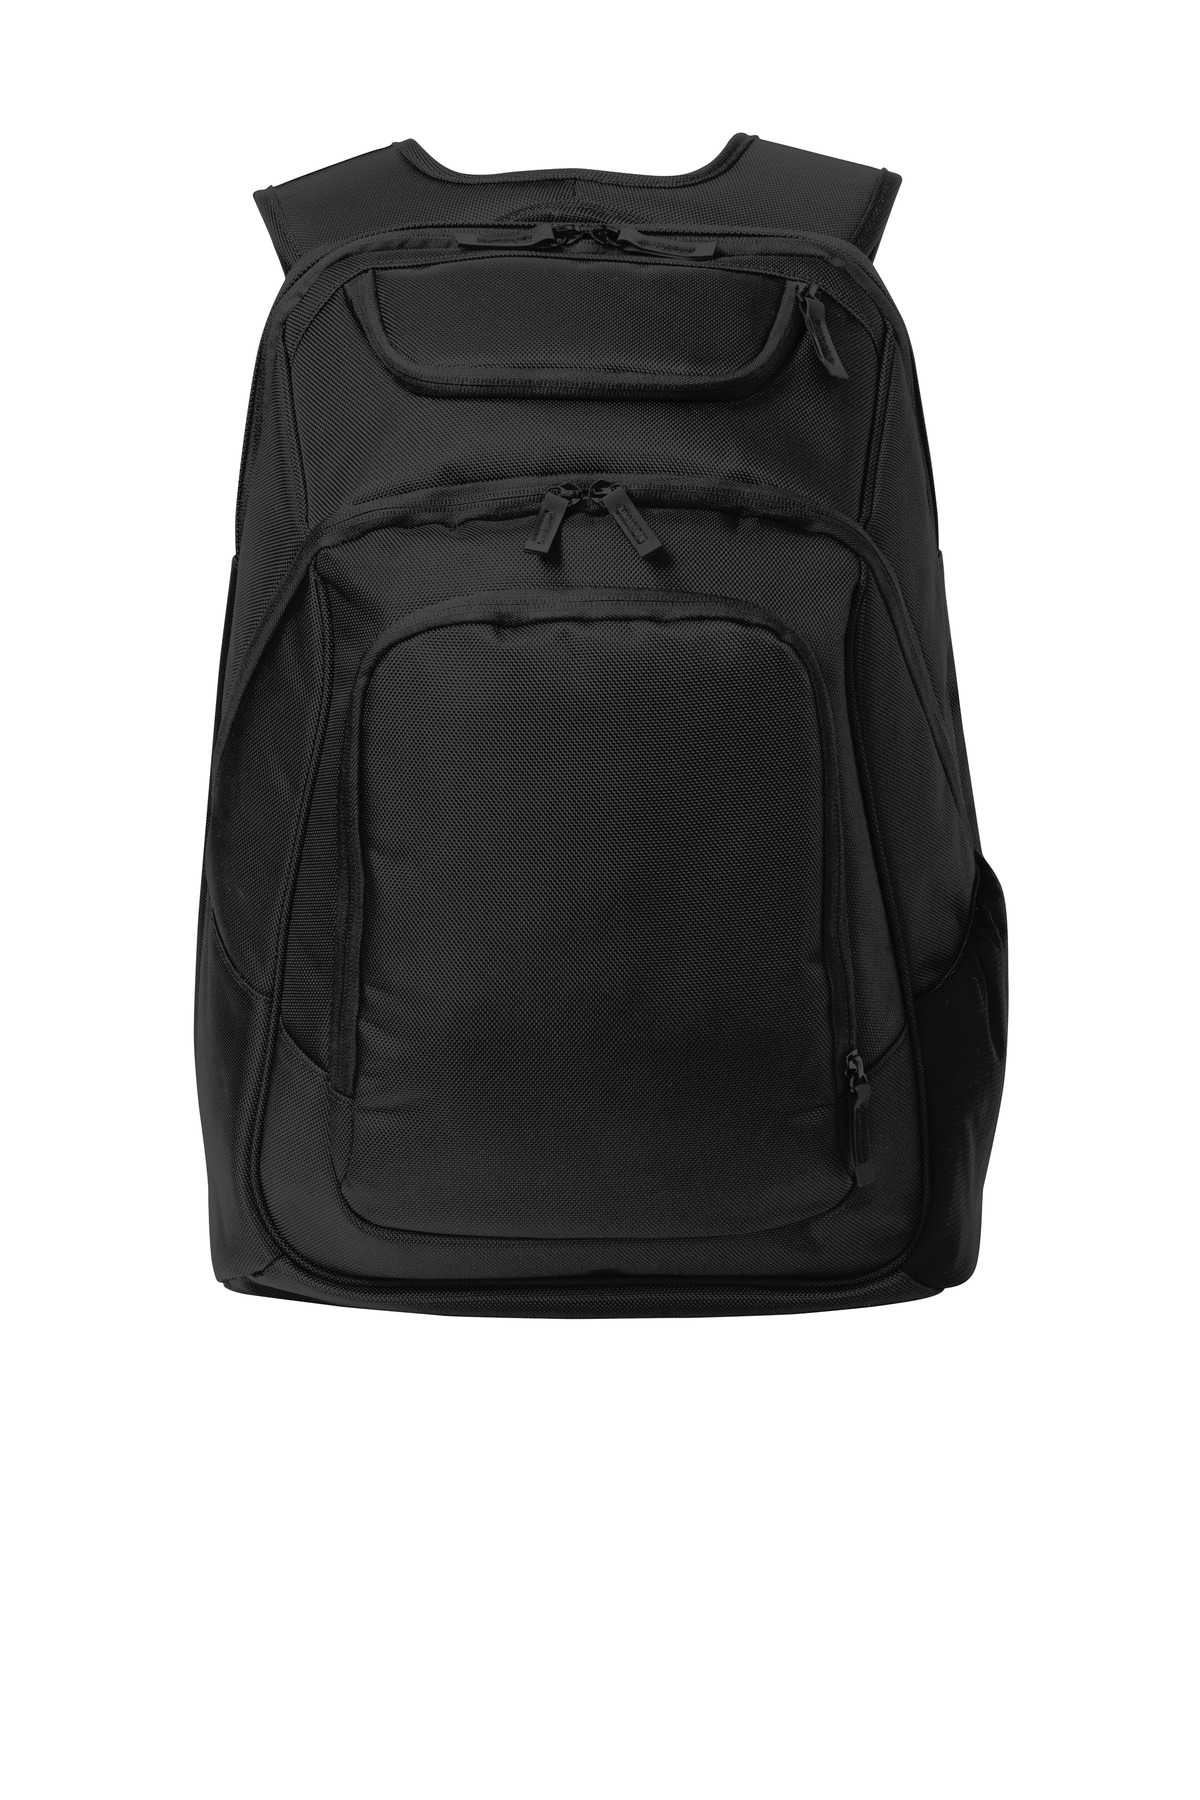 Port Authority Exec Backpack-Port Authority